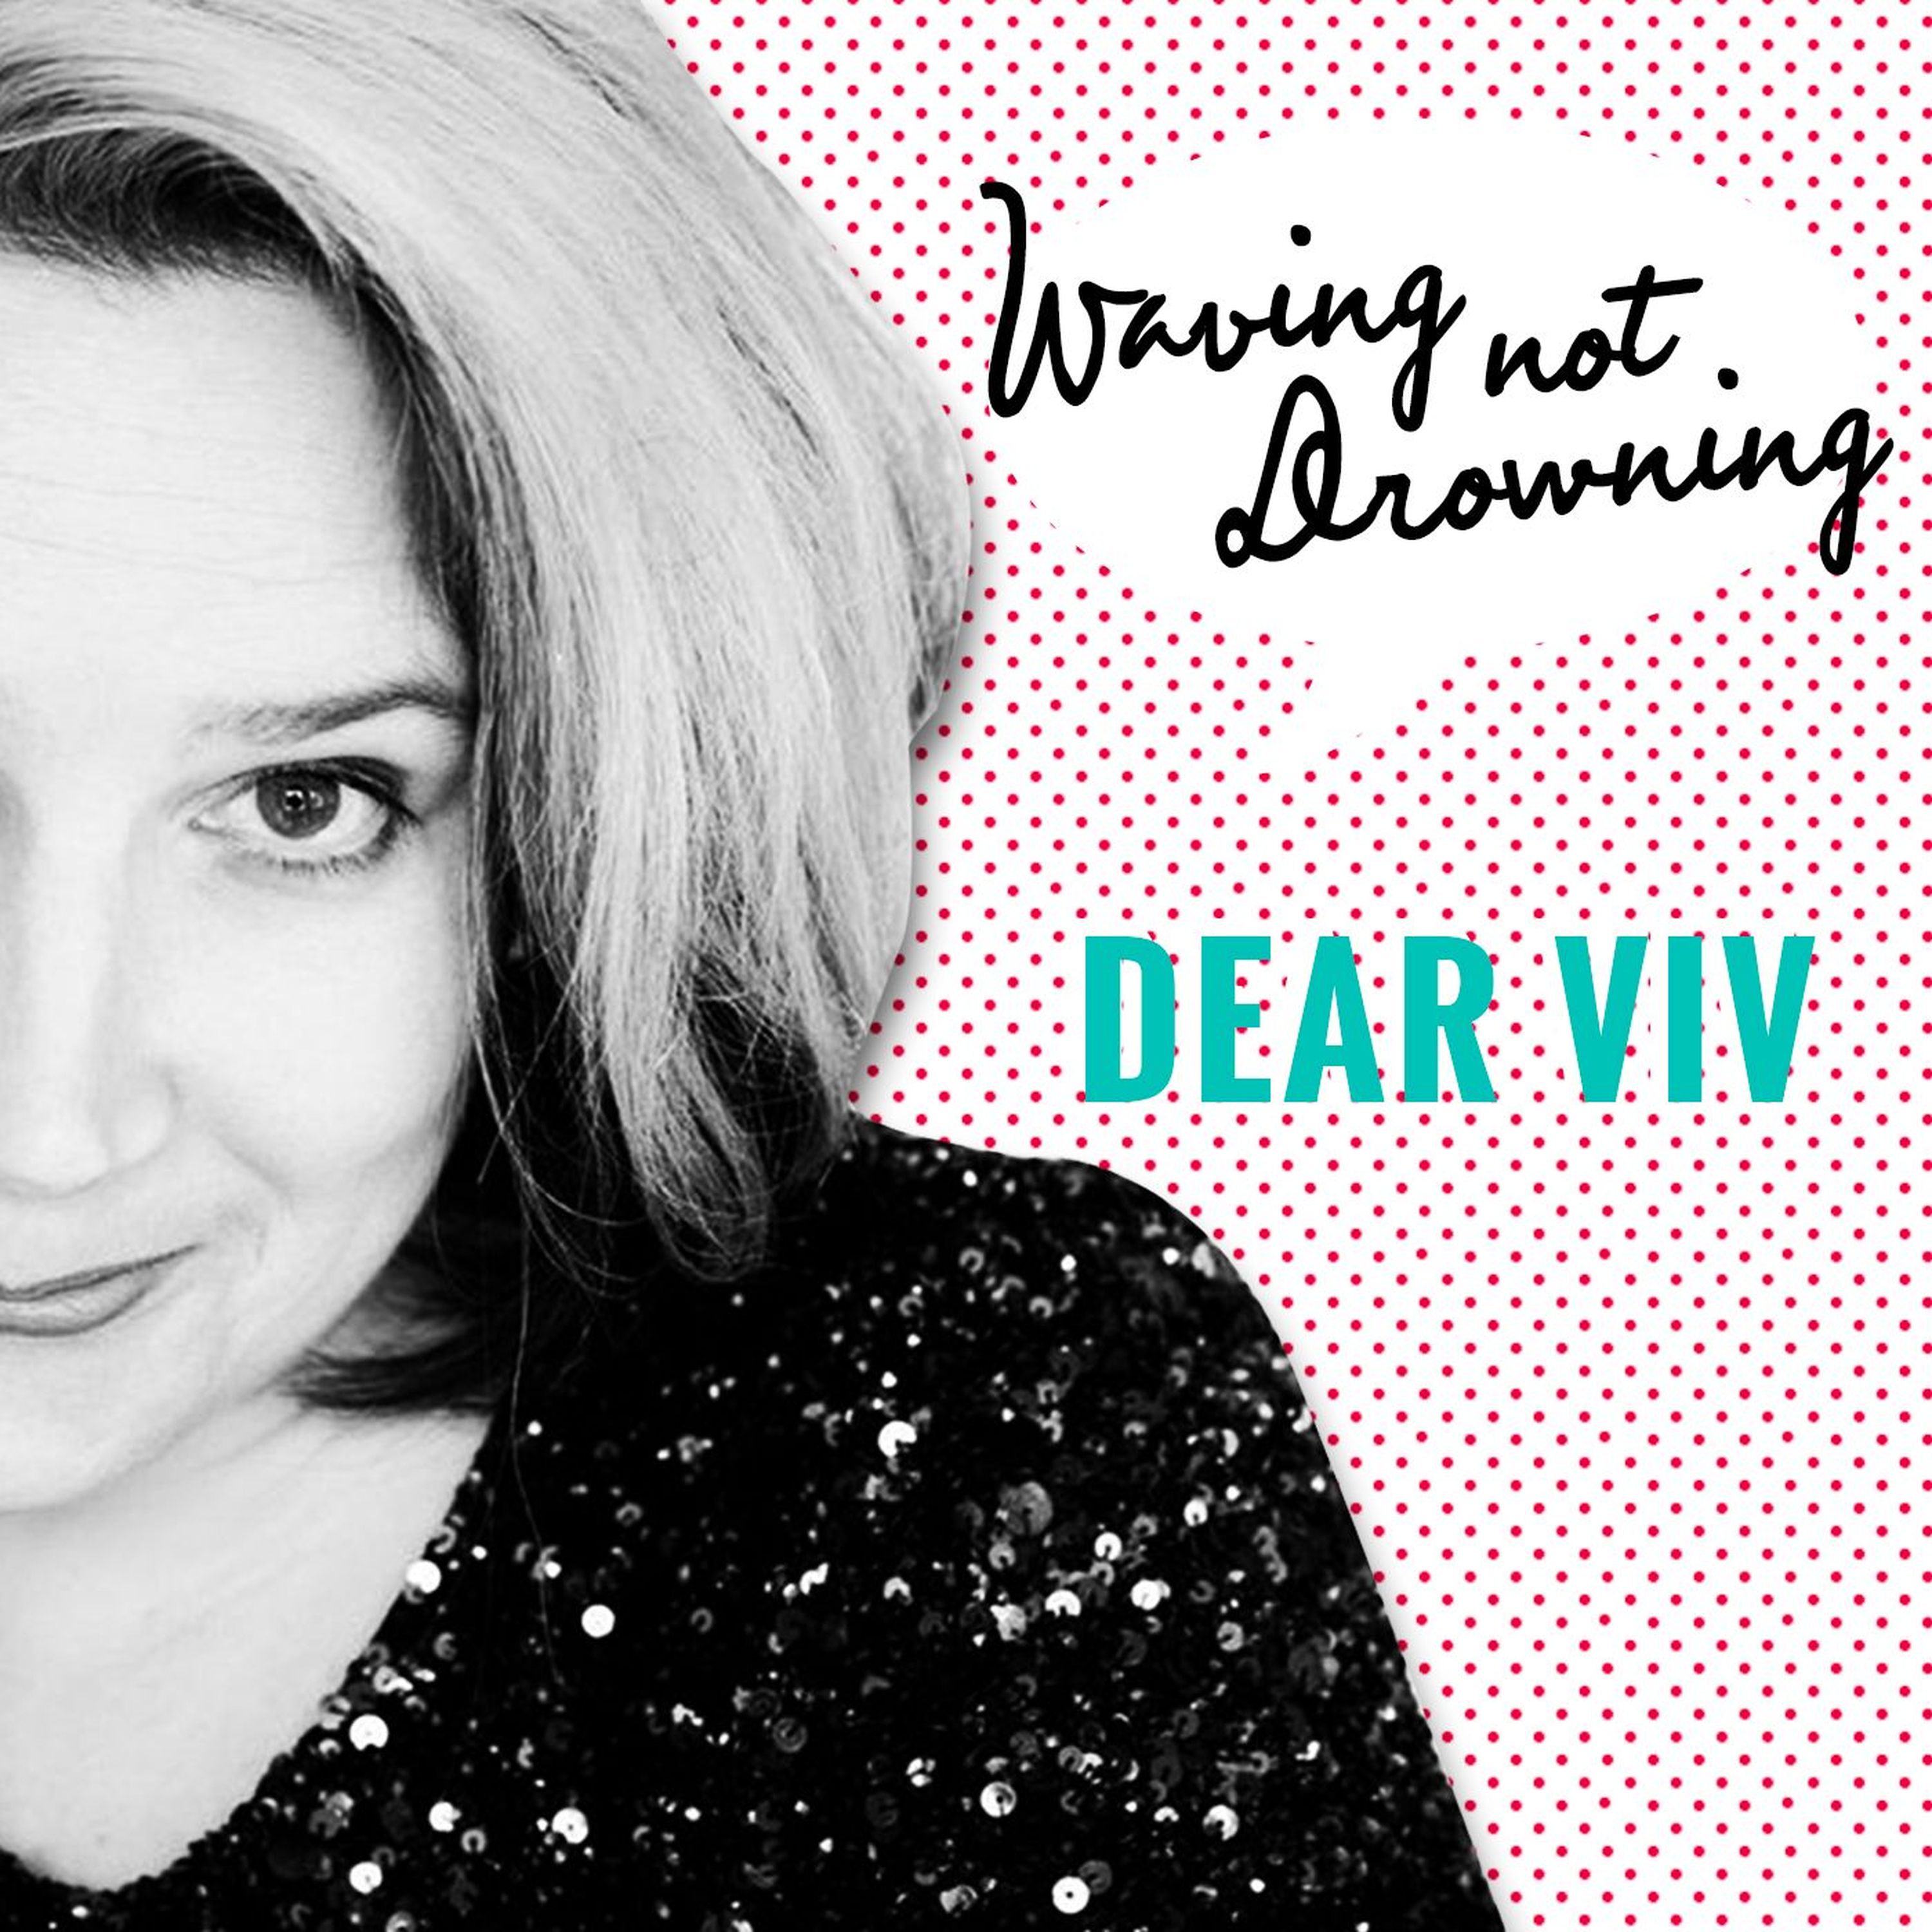 Dear Viv: He’s finally faced his drink problem - but it’s too late